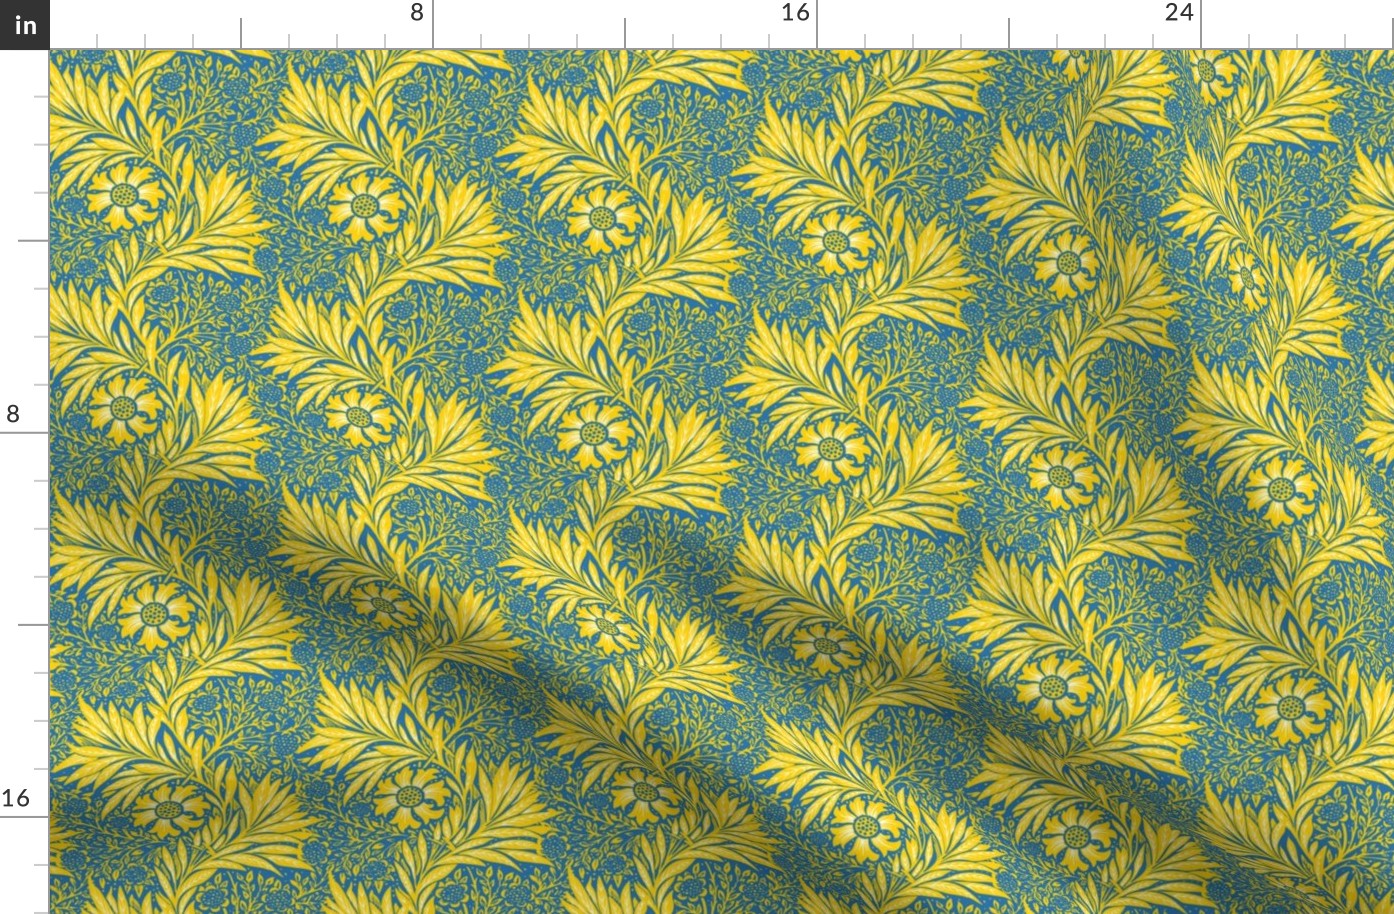 1875 Marigold by William Morris - U of California Los Angeles colors - Gold and White on Blue